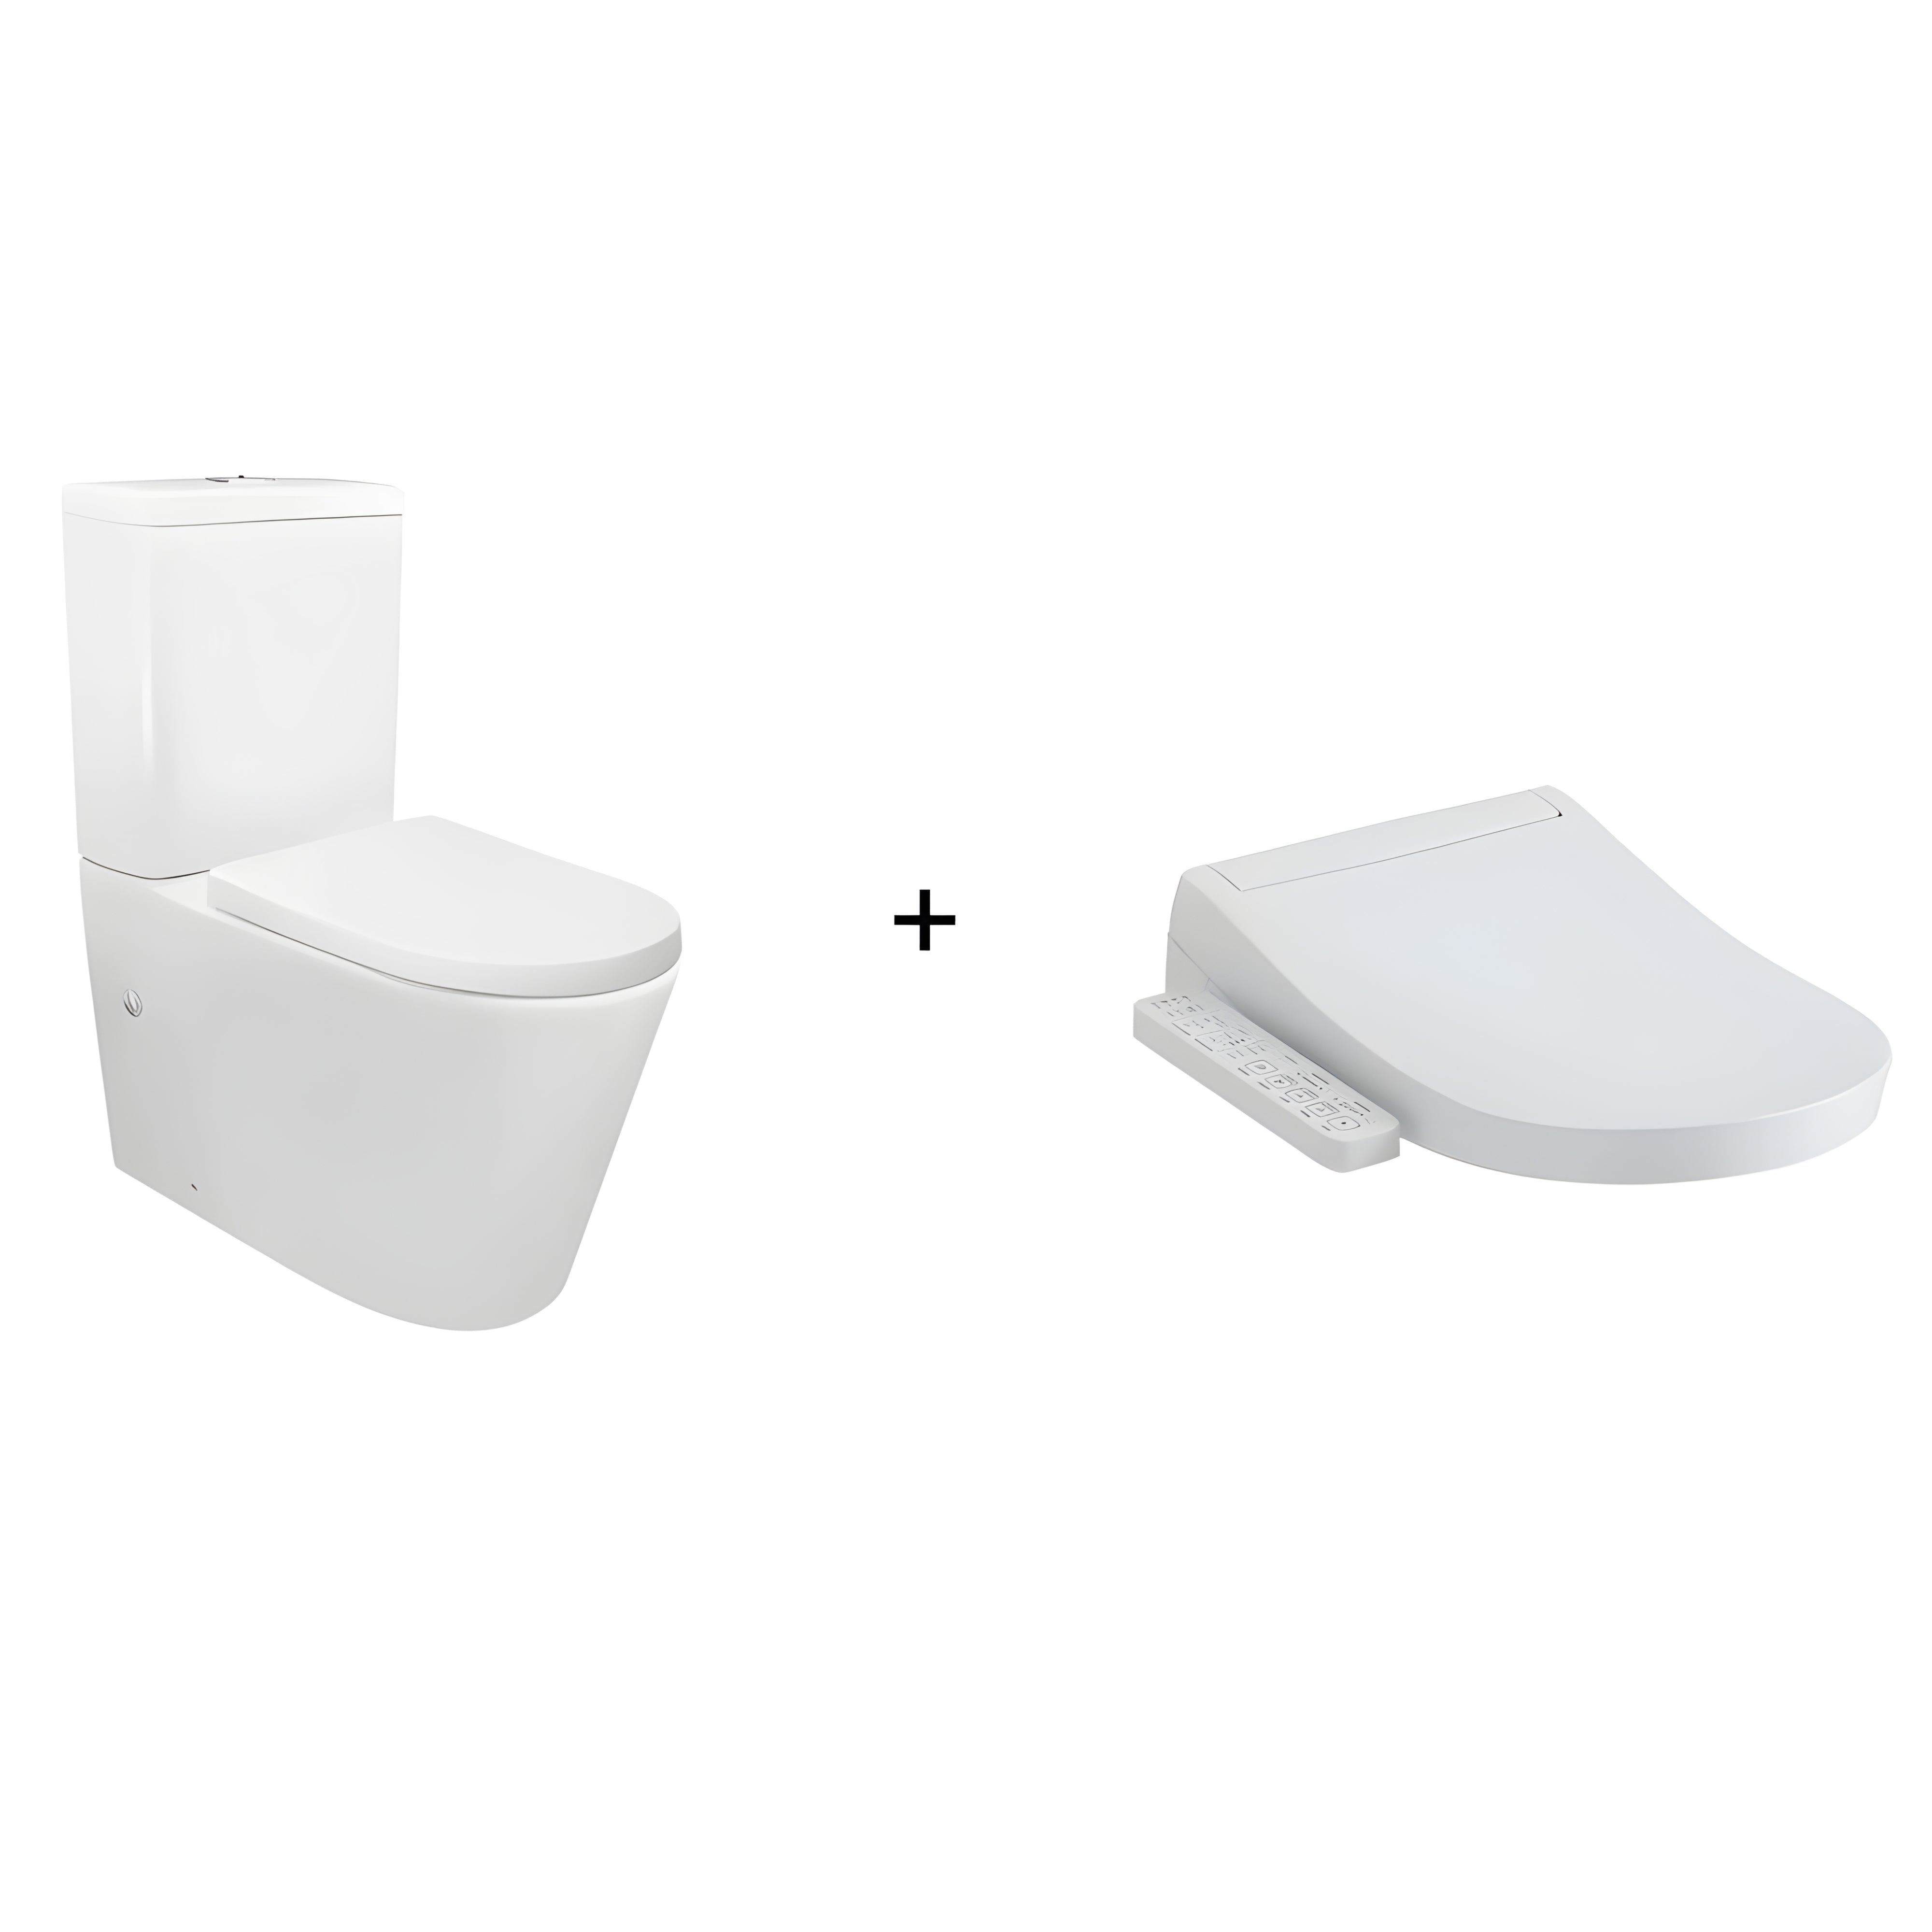 TOTO S2 WASHLET W/ SIDE CONTROL AND TORNADO TOILET SUITE PACKAGE D-SHAPED GLOSS WHITE